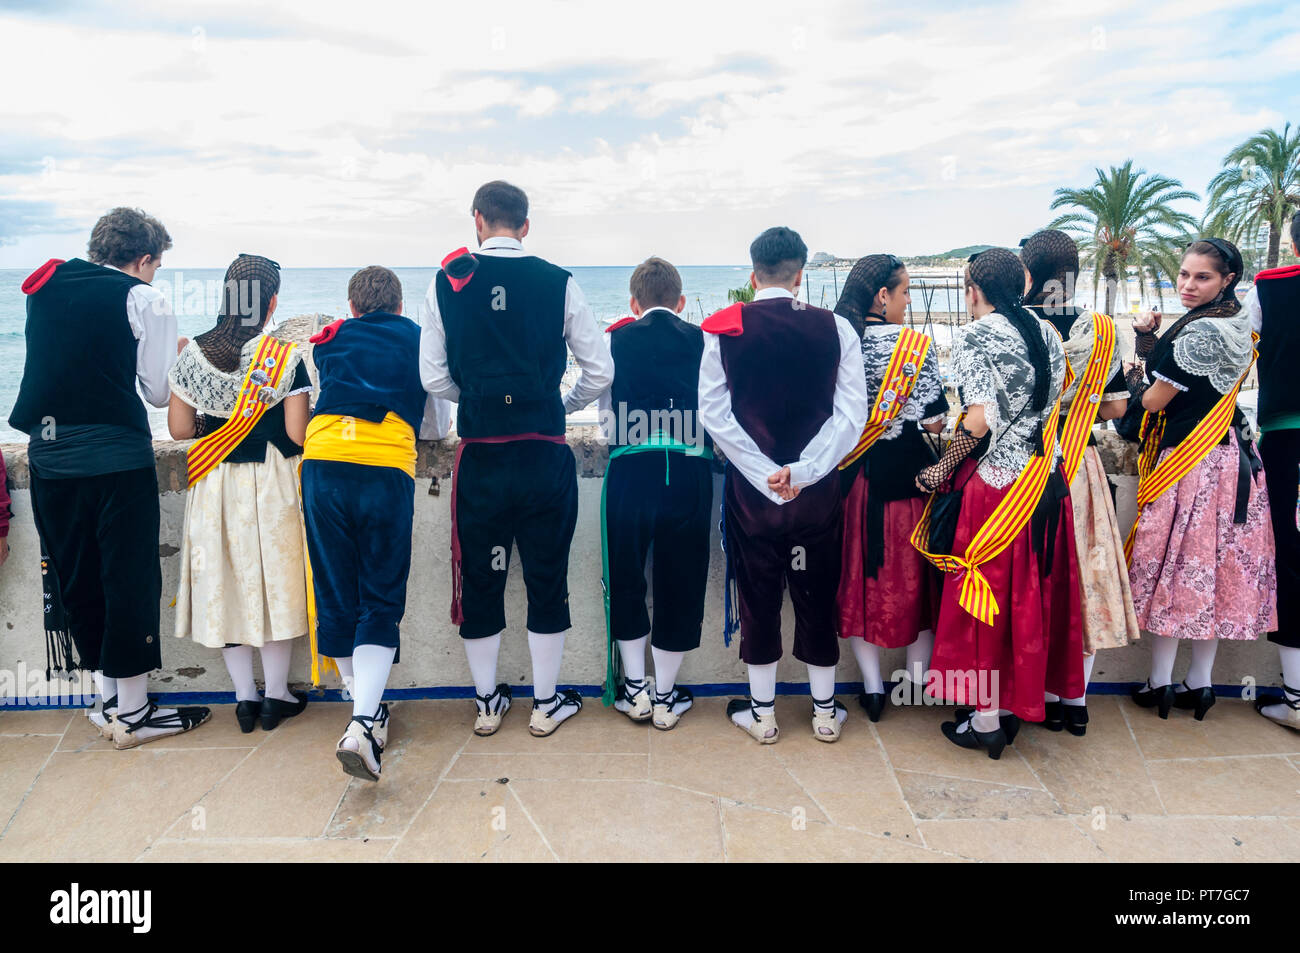 Sitges, Spain. 07th Oct, 2018. 40th Grape Stomping Competition is one of the events held within the traditional 57th harvest festival, which is traditionally celebrated in Sitges, in the Plaza de la Fragata. Departure from the “Pubilles” and “Hereus” of the parish church of Sant Bartomeu and Santa Tecla, after offering the first must to the Eucharist. Credit: Cisco Pelay / Alamy Live News. Stock Photo